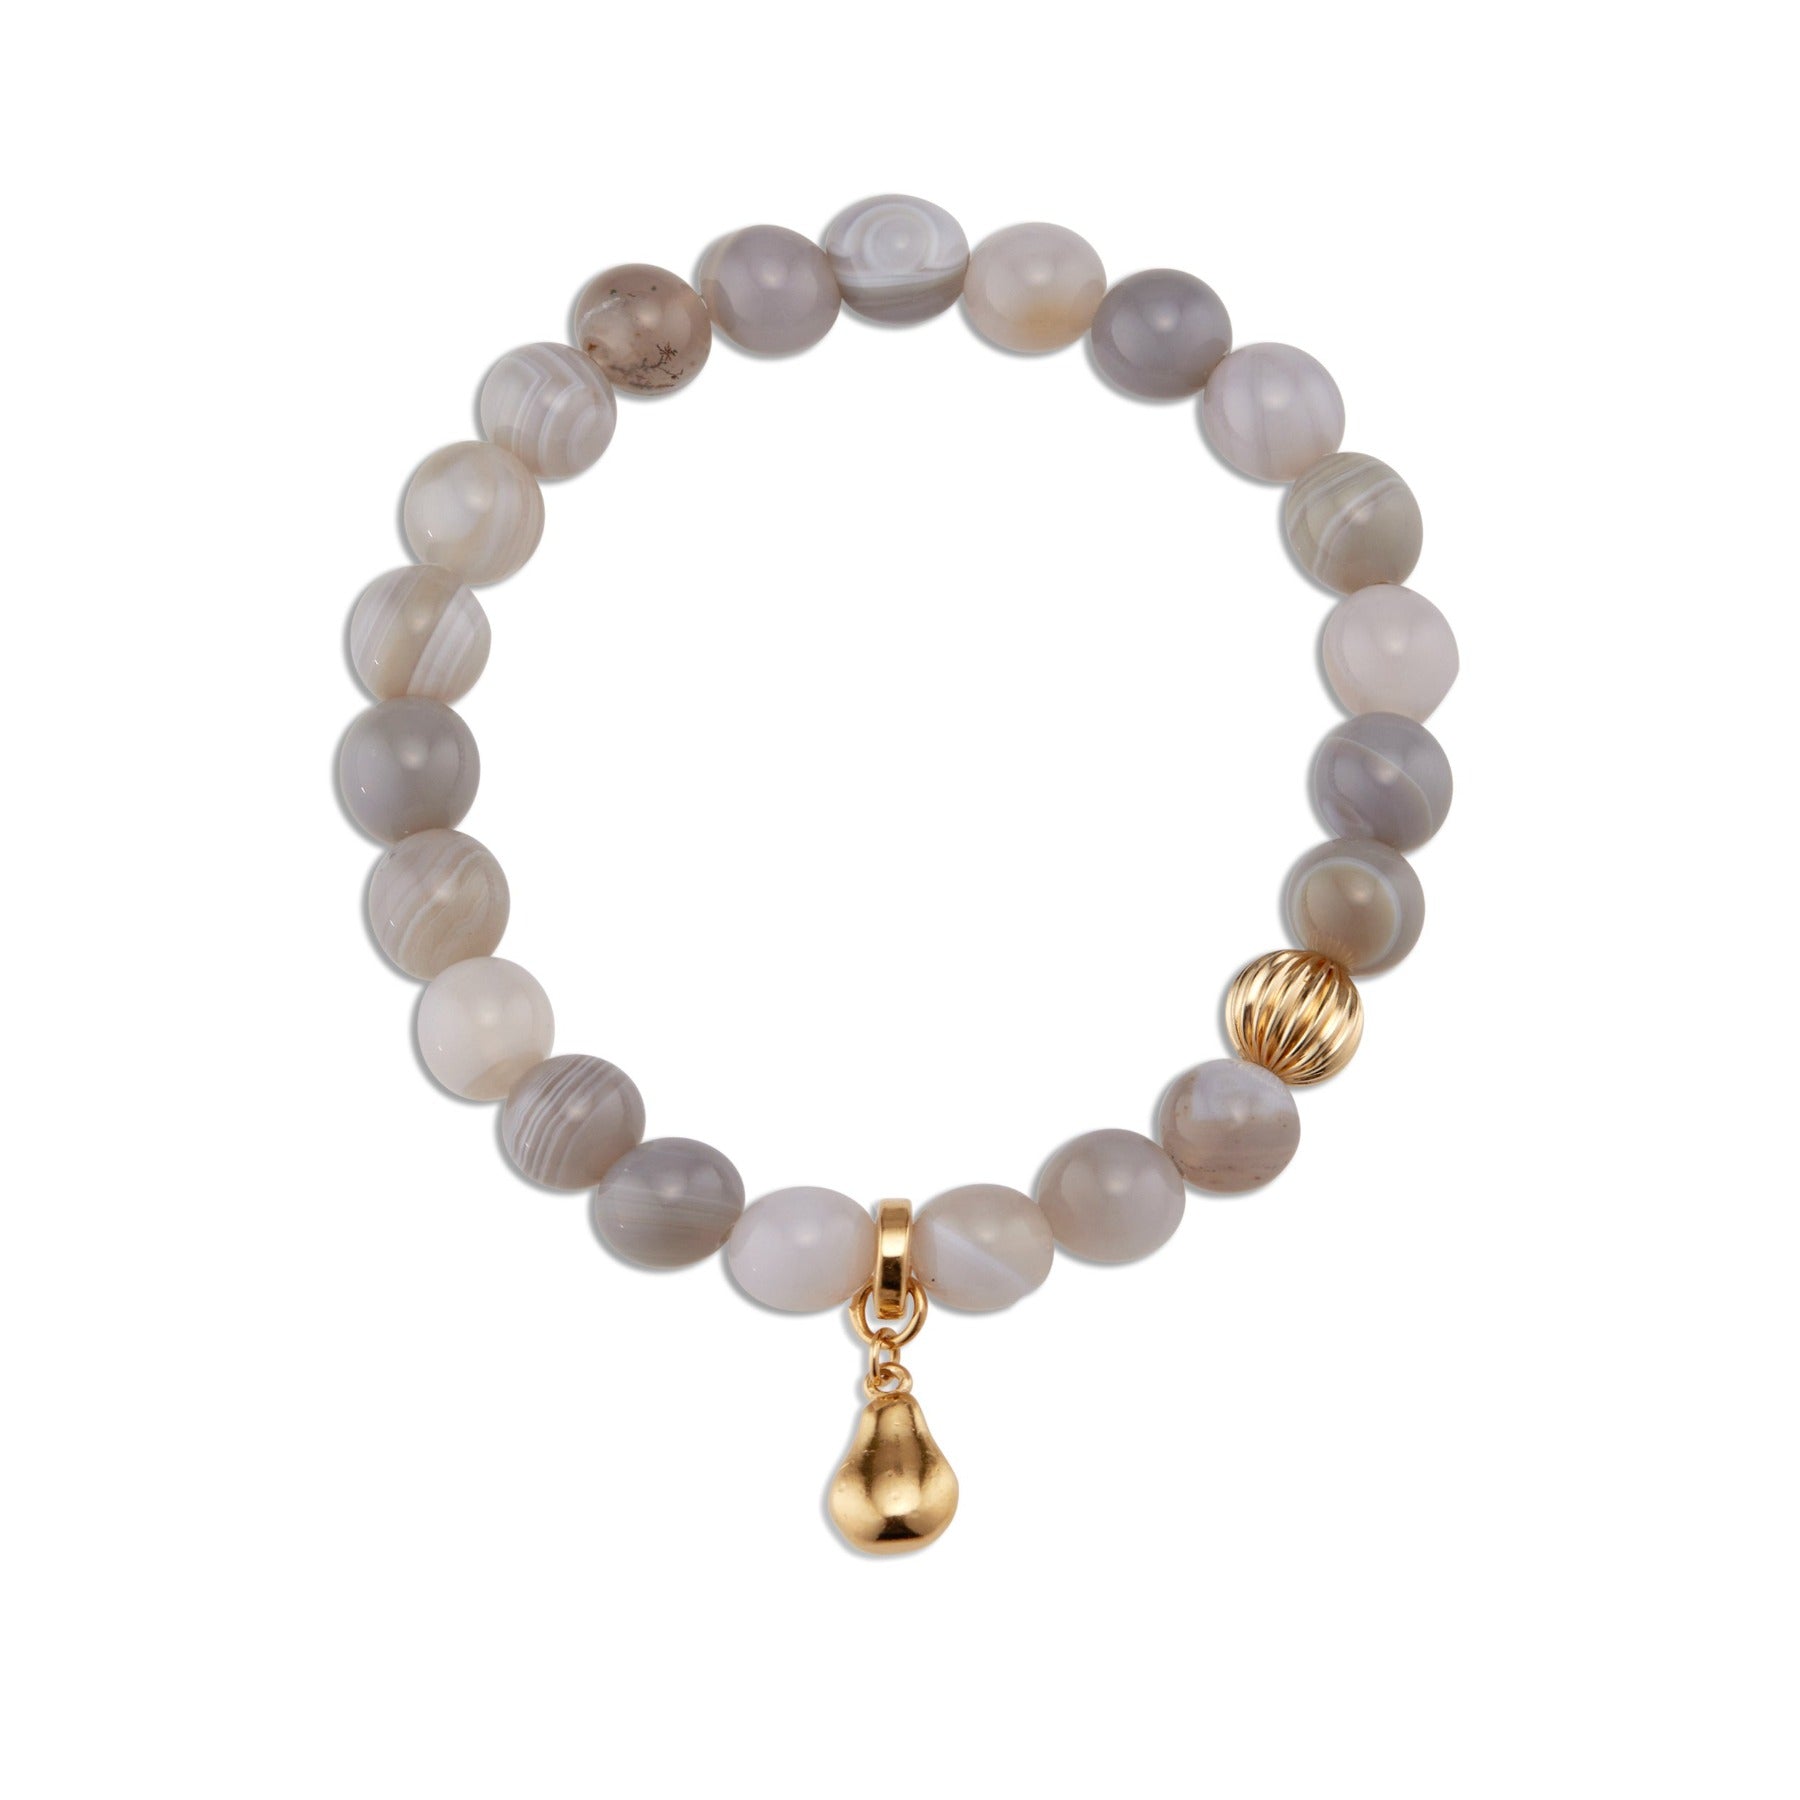 Grey banded agate crystal smooth gemstone elastic bracelet with 14k gold corrugated bead and pear charm.